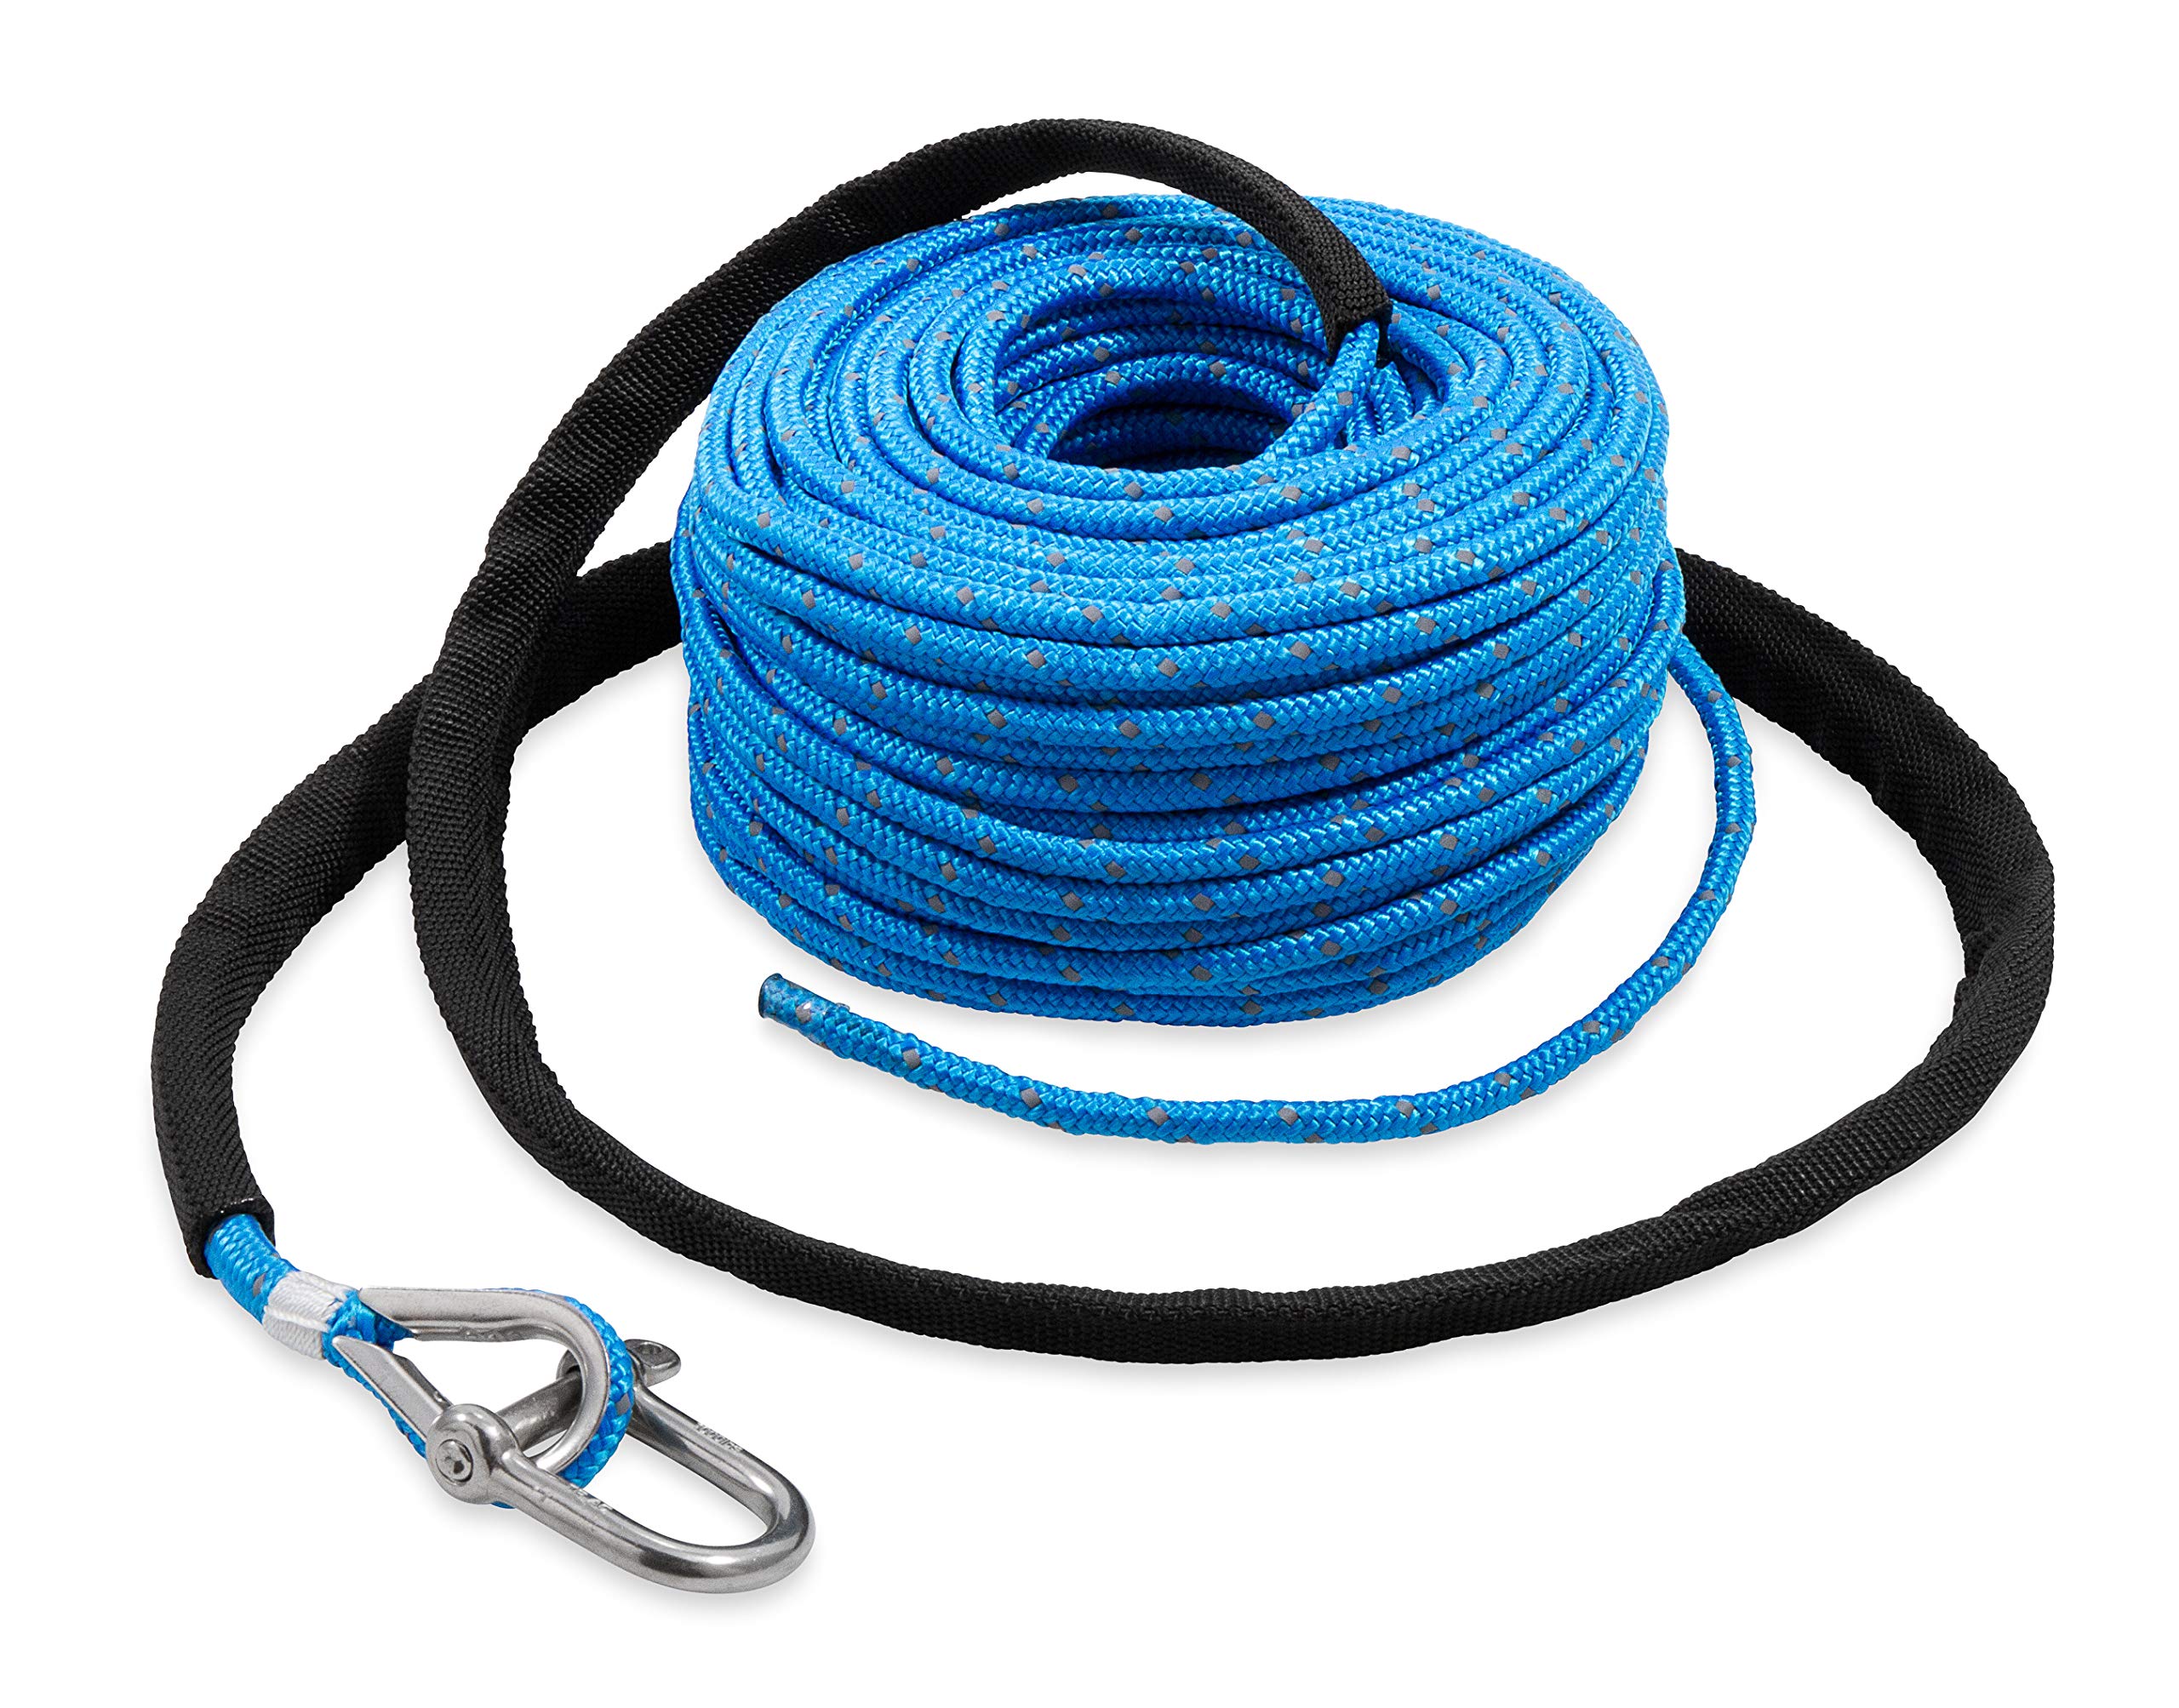 Trac Outdoor 100ft Anchor Rope | Features an 800 lb. Break Strength | Includes a Stainless Steel Anchor Shackle (69080)